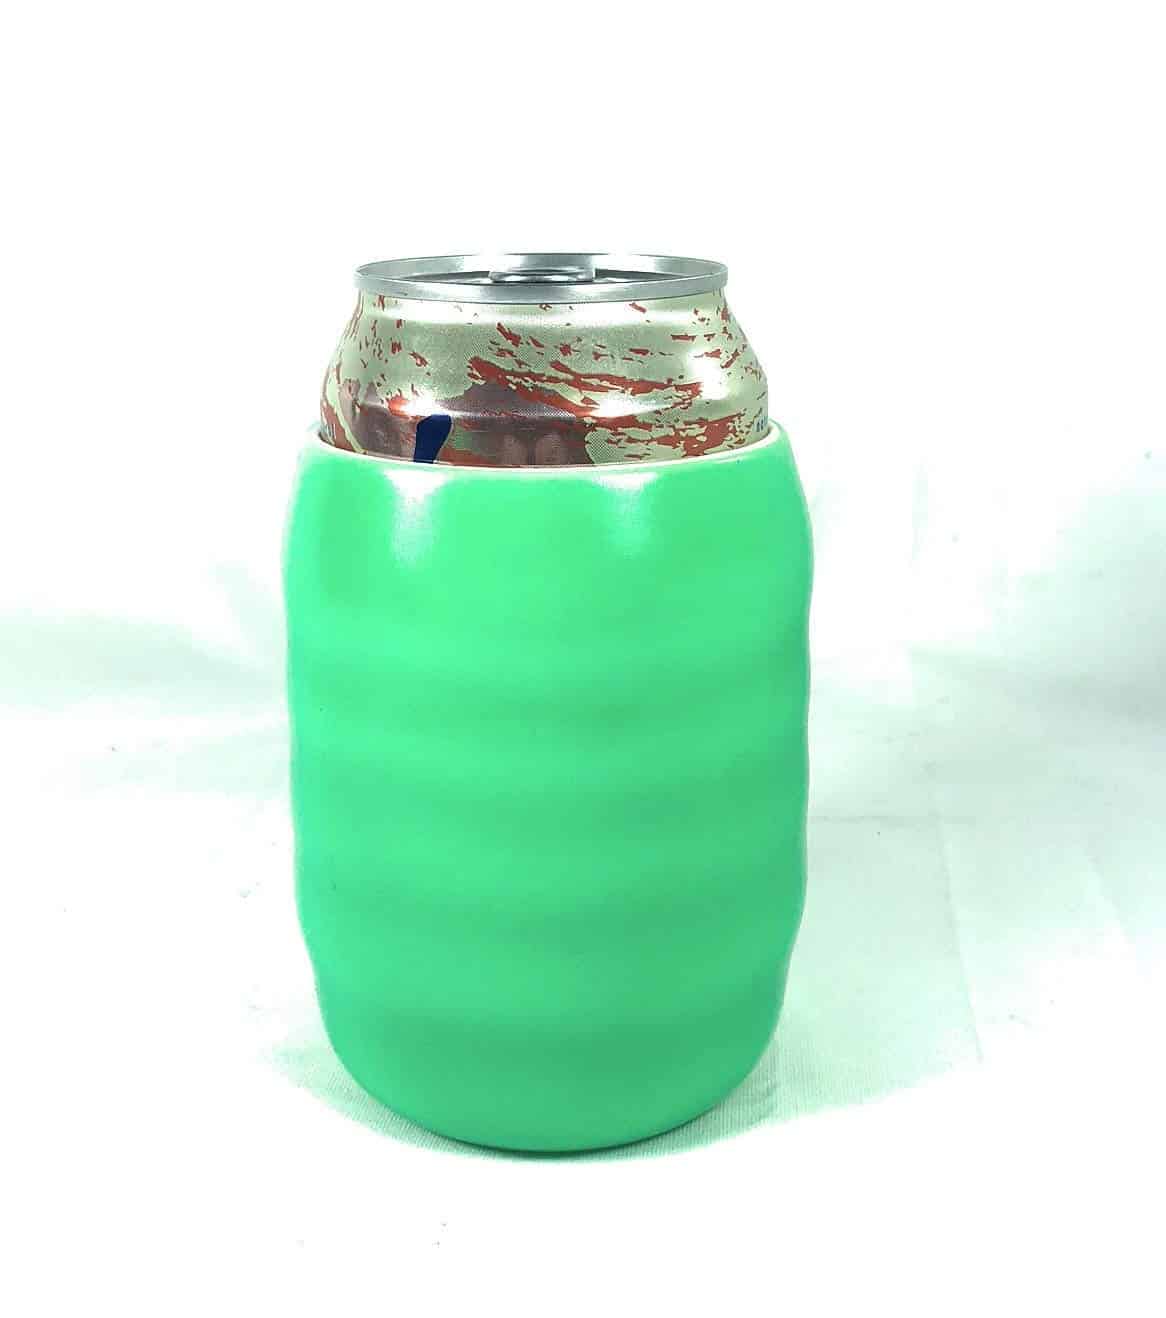 https://www.cableprotectorworks.com/wp-content/uploads/imported/Glow-in-the-Dark-Koozie-Can-Cooler-Sleeve-for-Beer-Soft-Drink-Bright-Green-Glow-4-B07GDCY1Y6-3.jpg